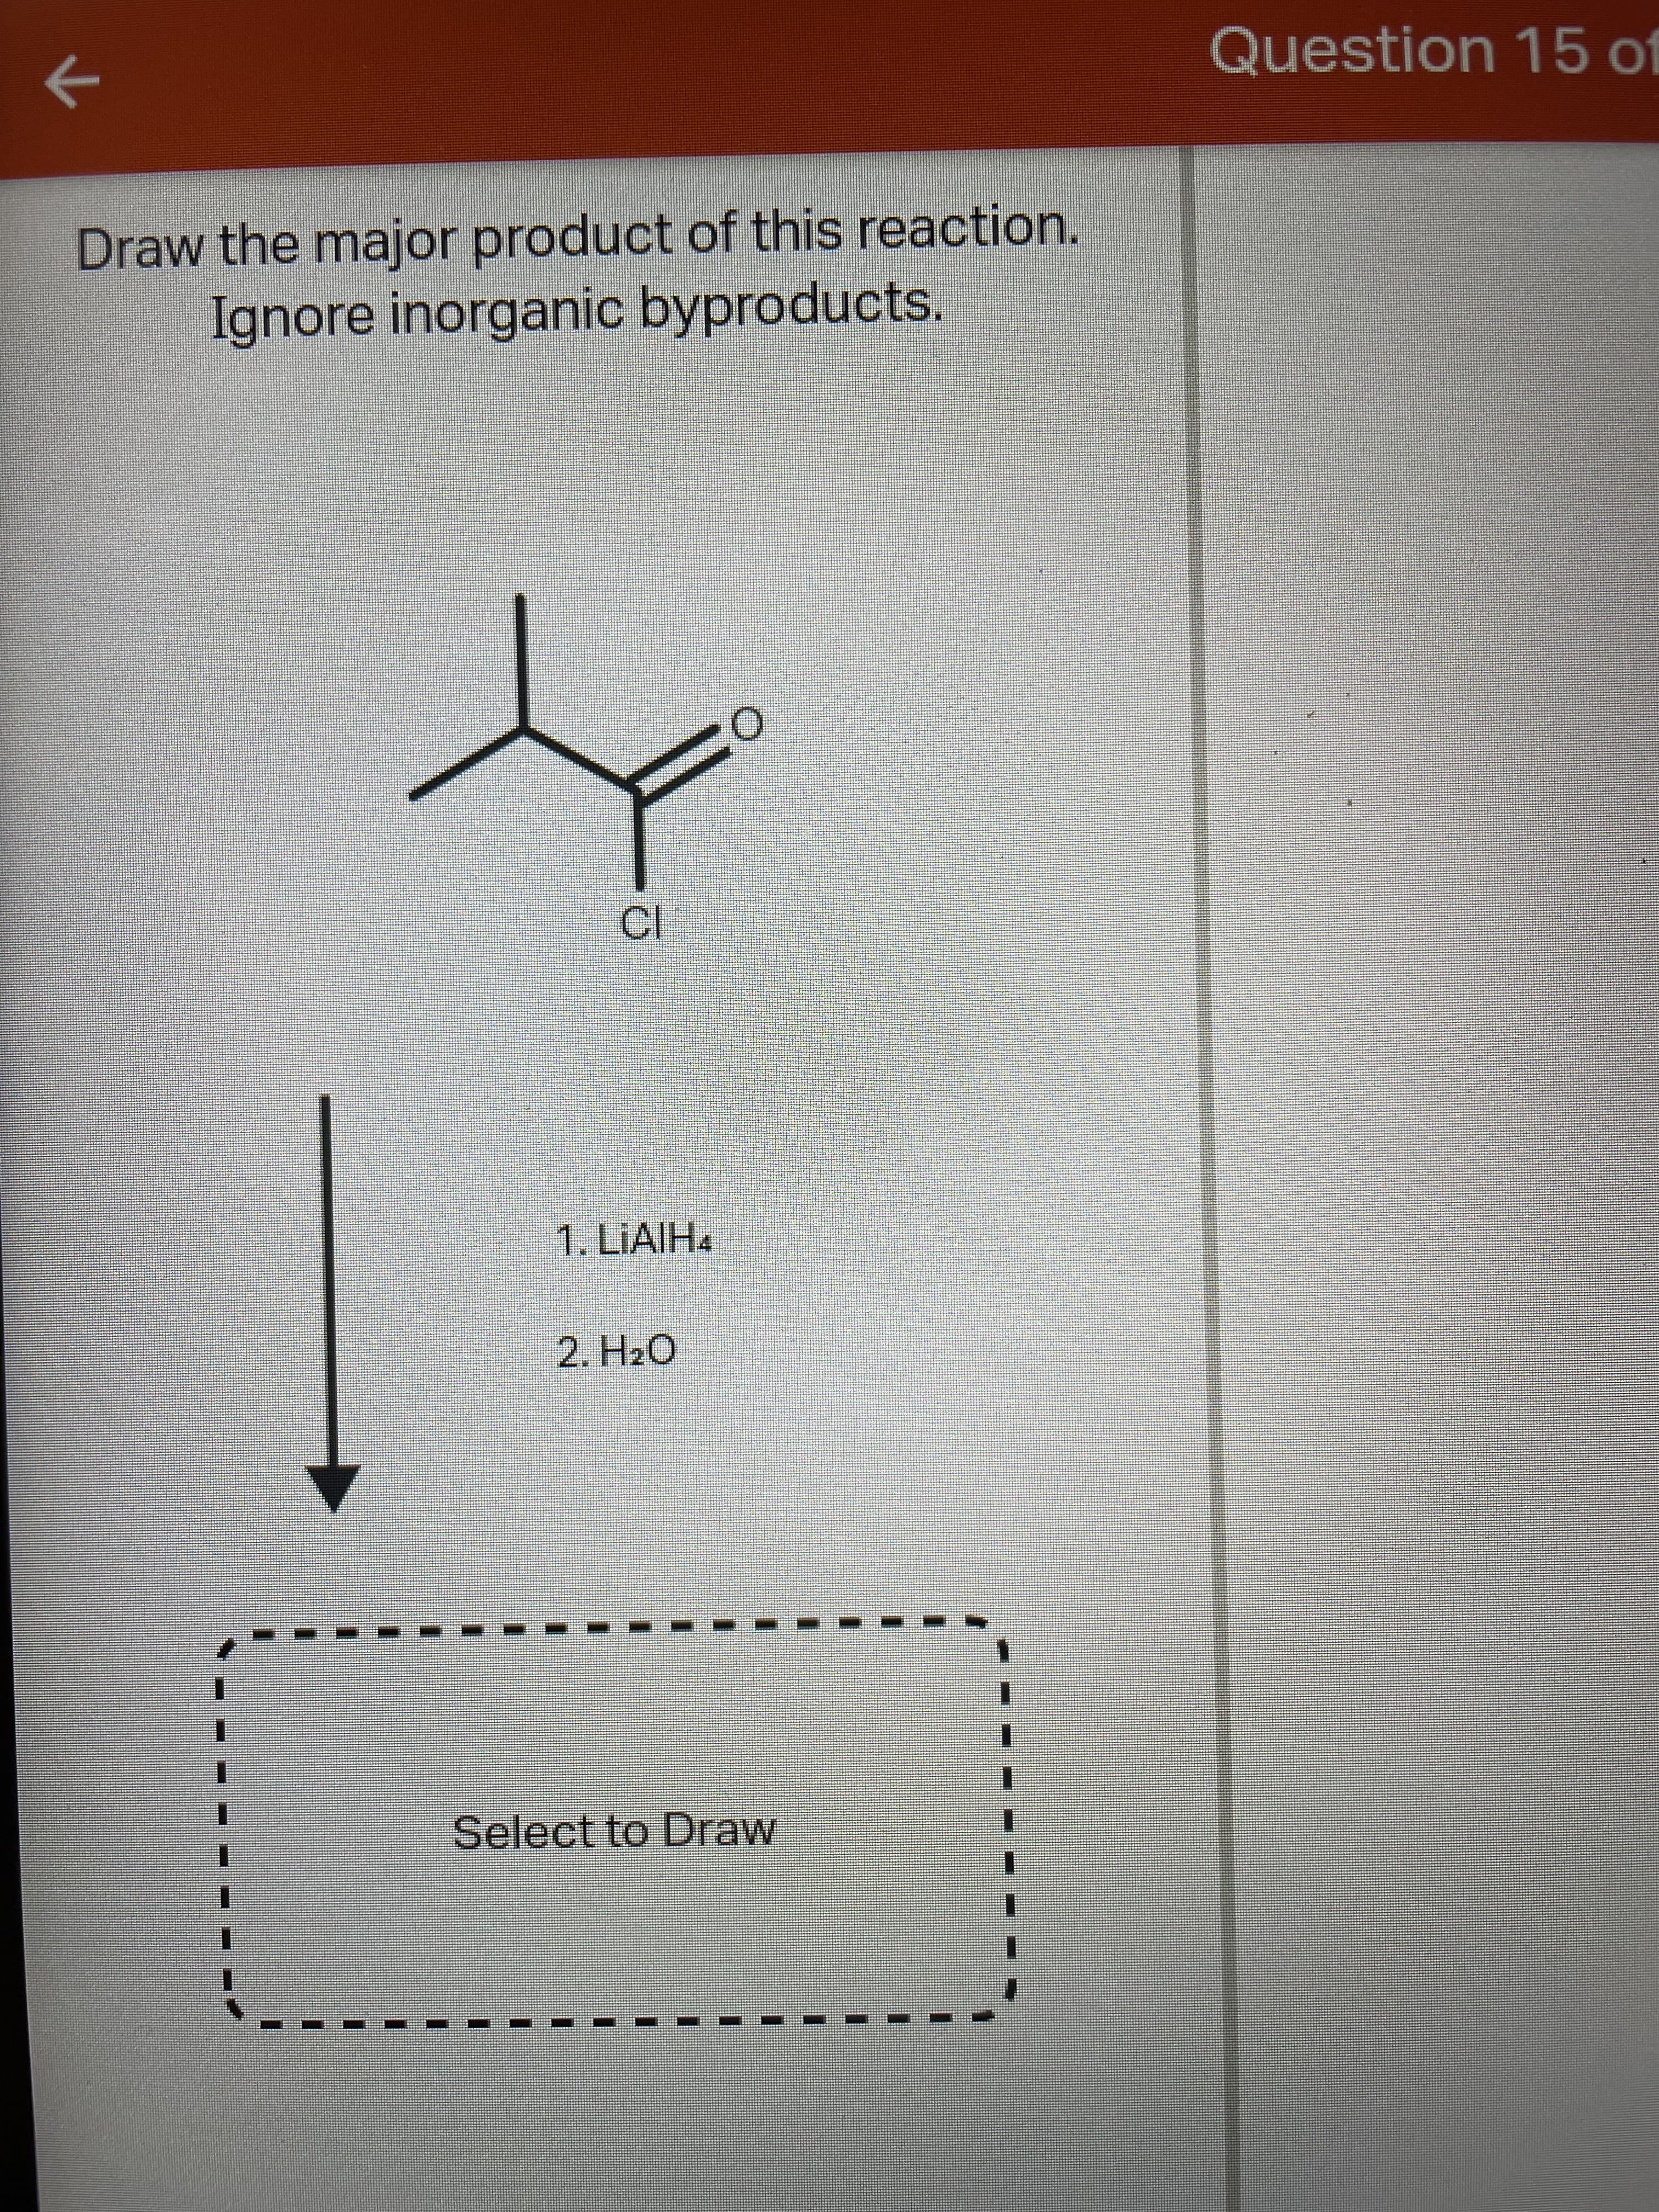 Question 15 of
Draw the major product of this reaction.
Ignore inorganic byproducts.
1. LIAIH4
2. H2O
1.
Select to Draw
